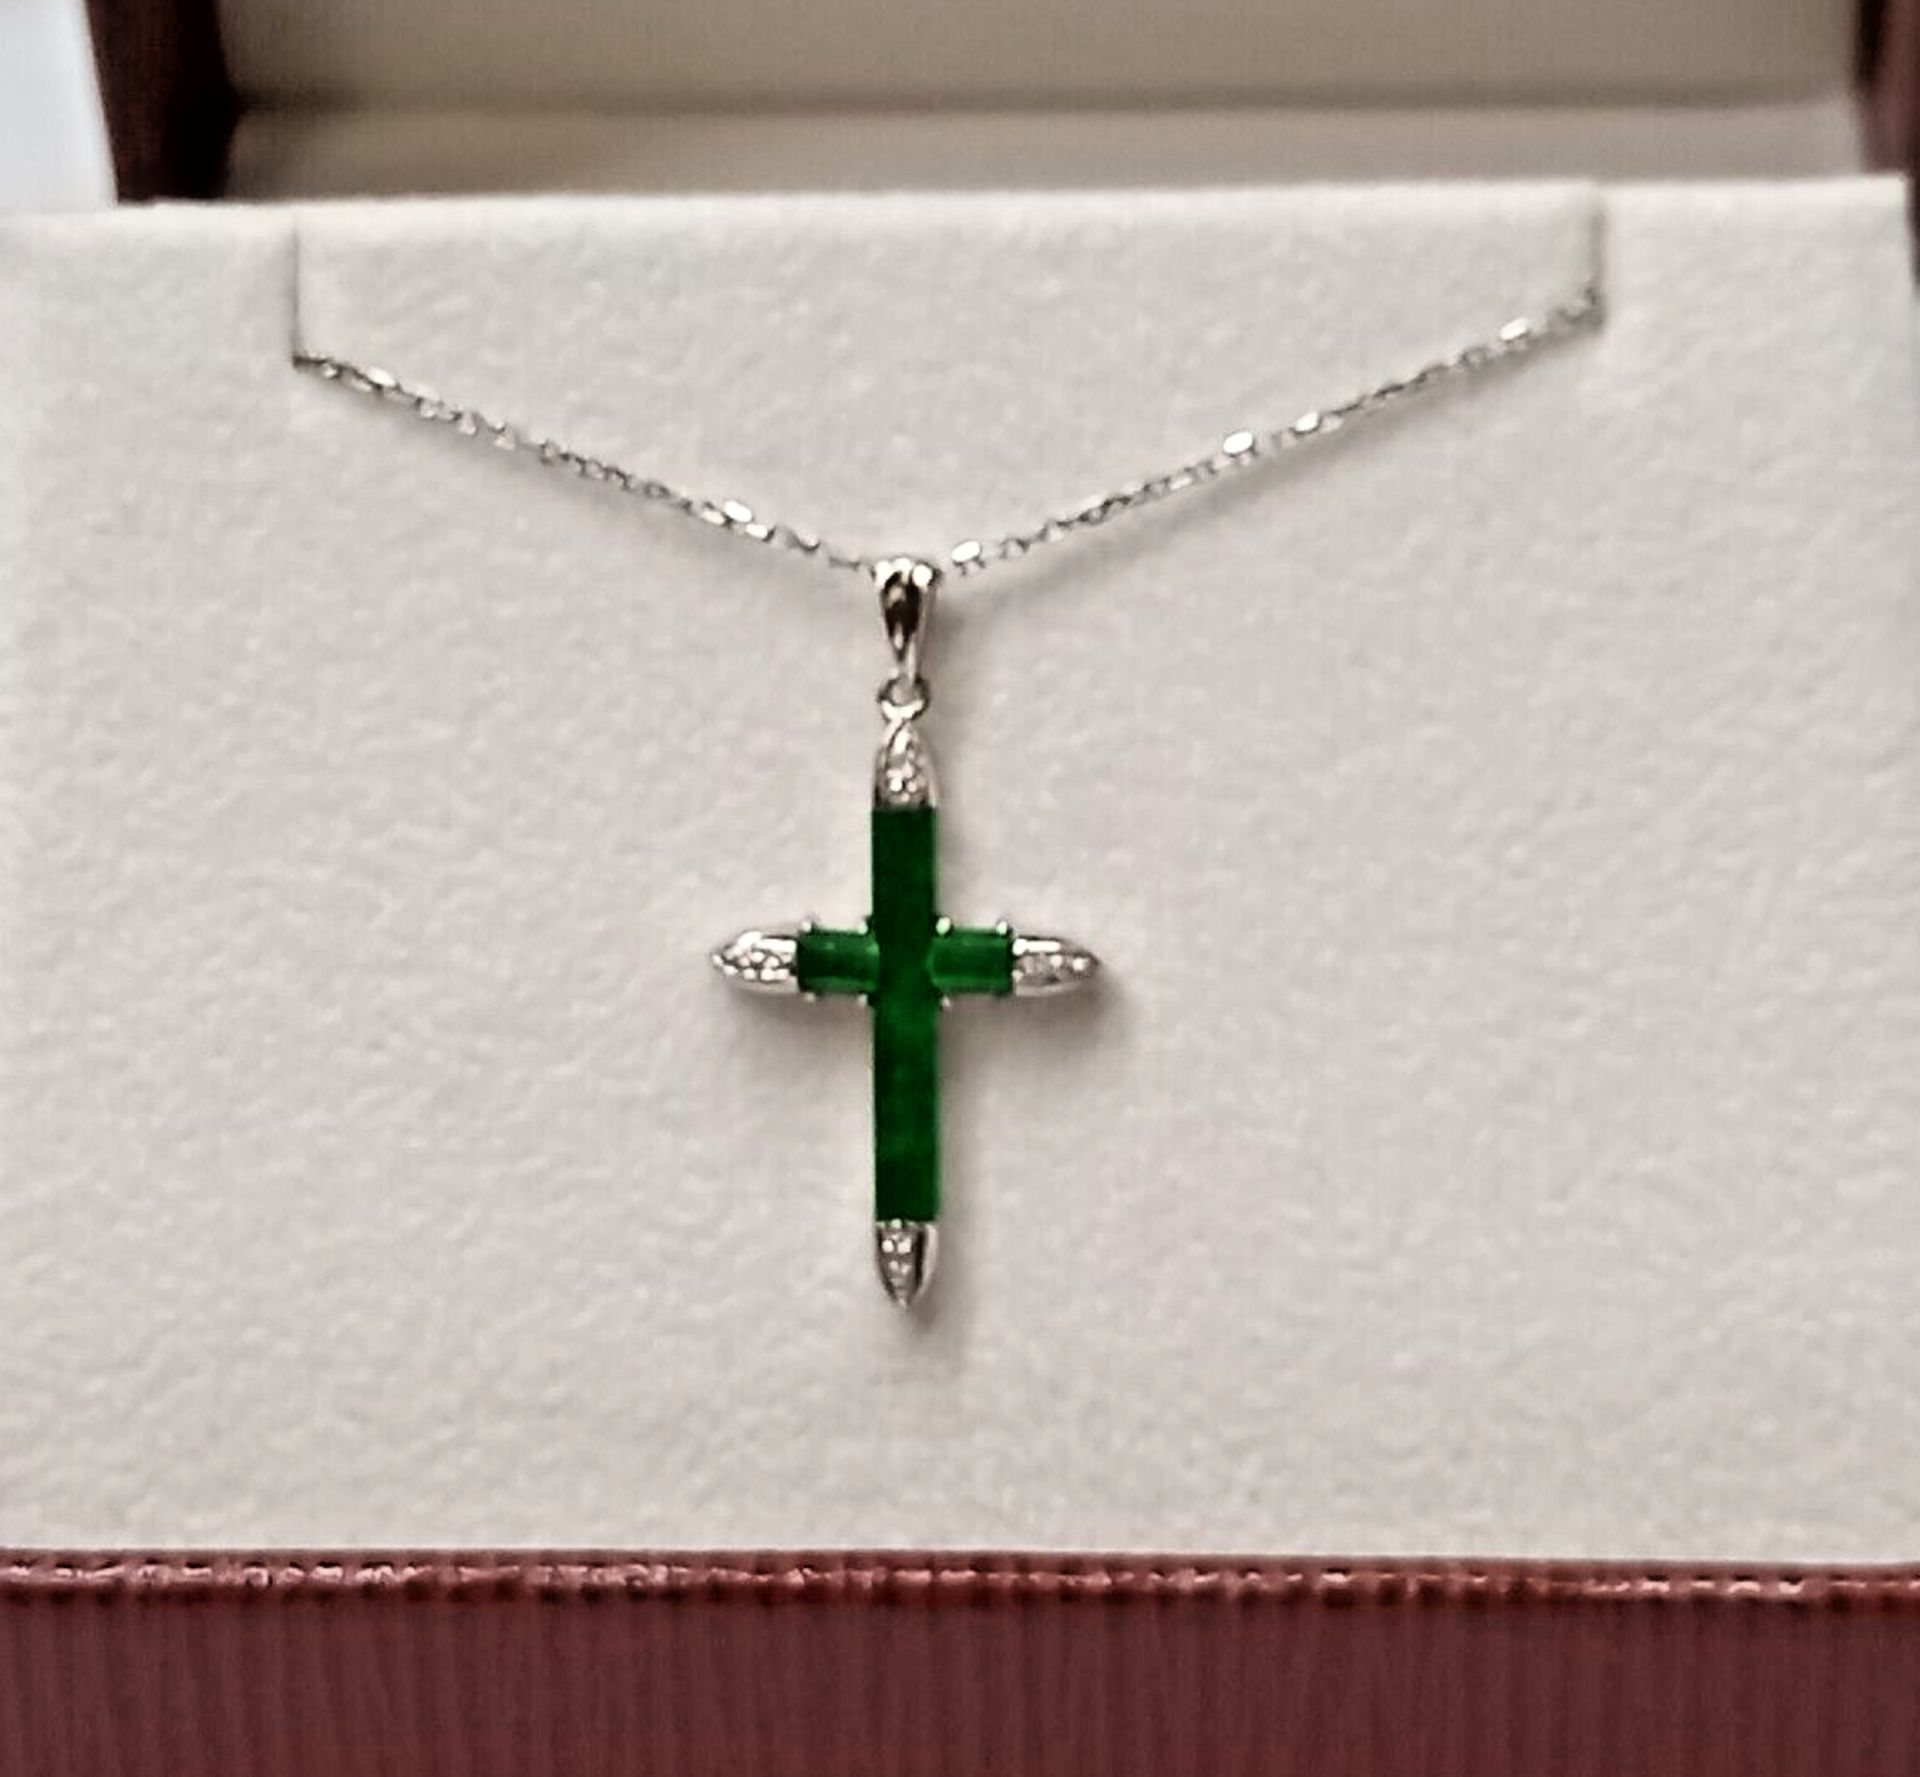 18CT JADE & 0.08CT DIAMOND CROSS PENDANT IN GIFT BOX WITH VALUATION CERTIFICATE OF £895 - Image 2 of 5